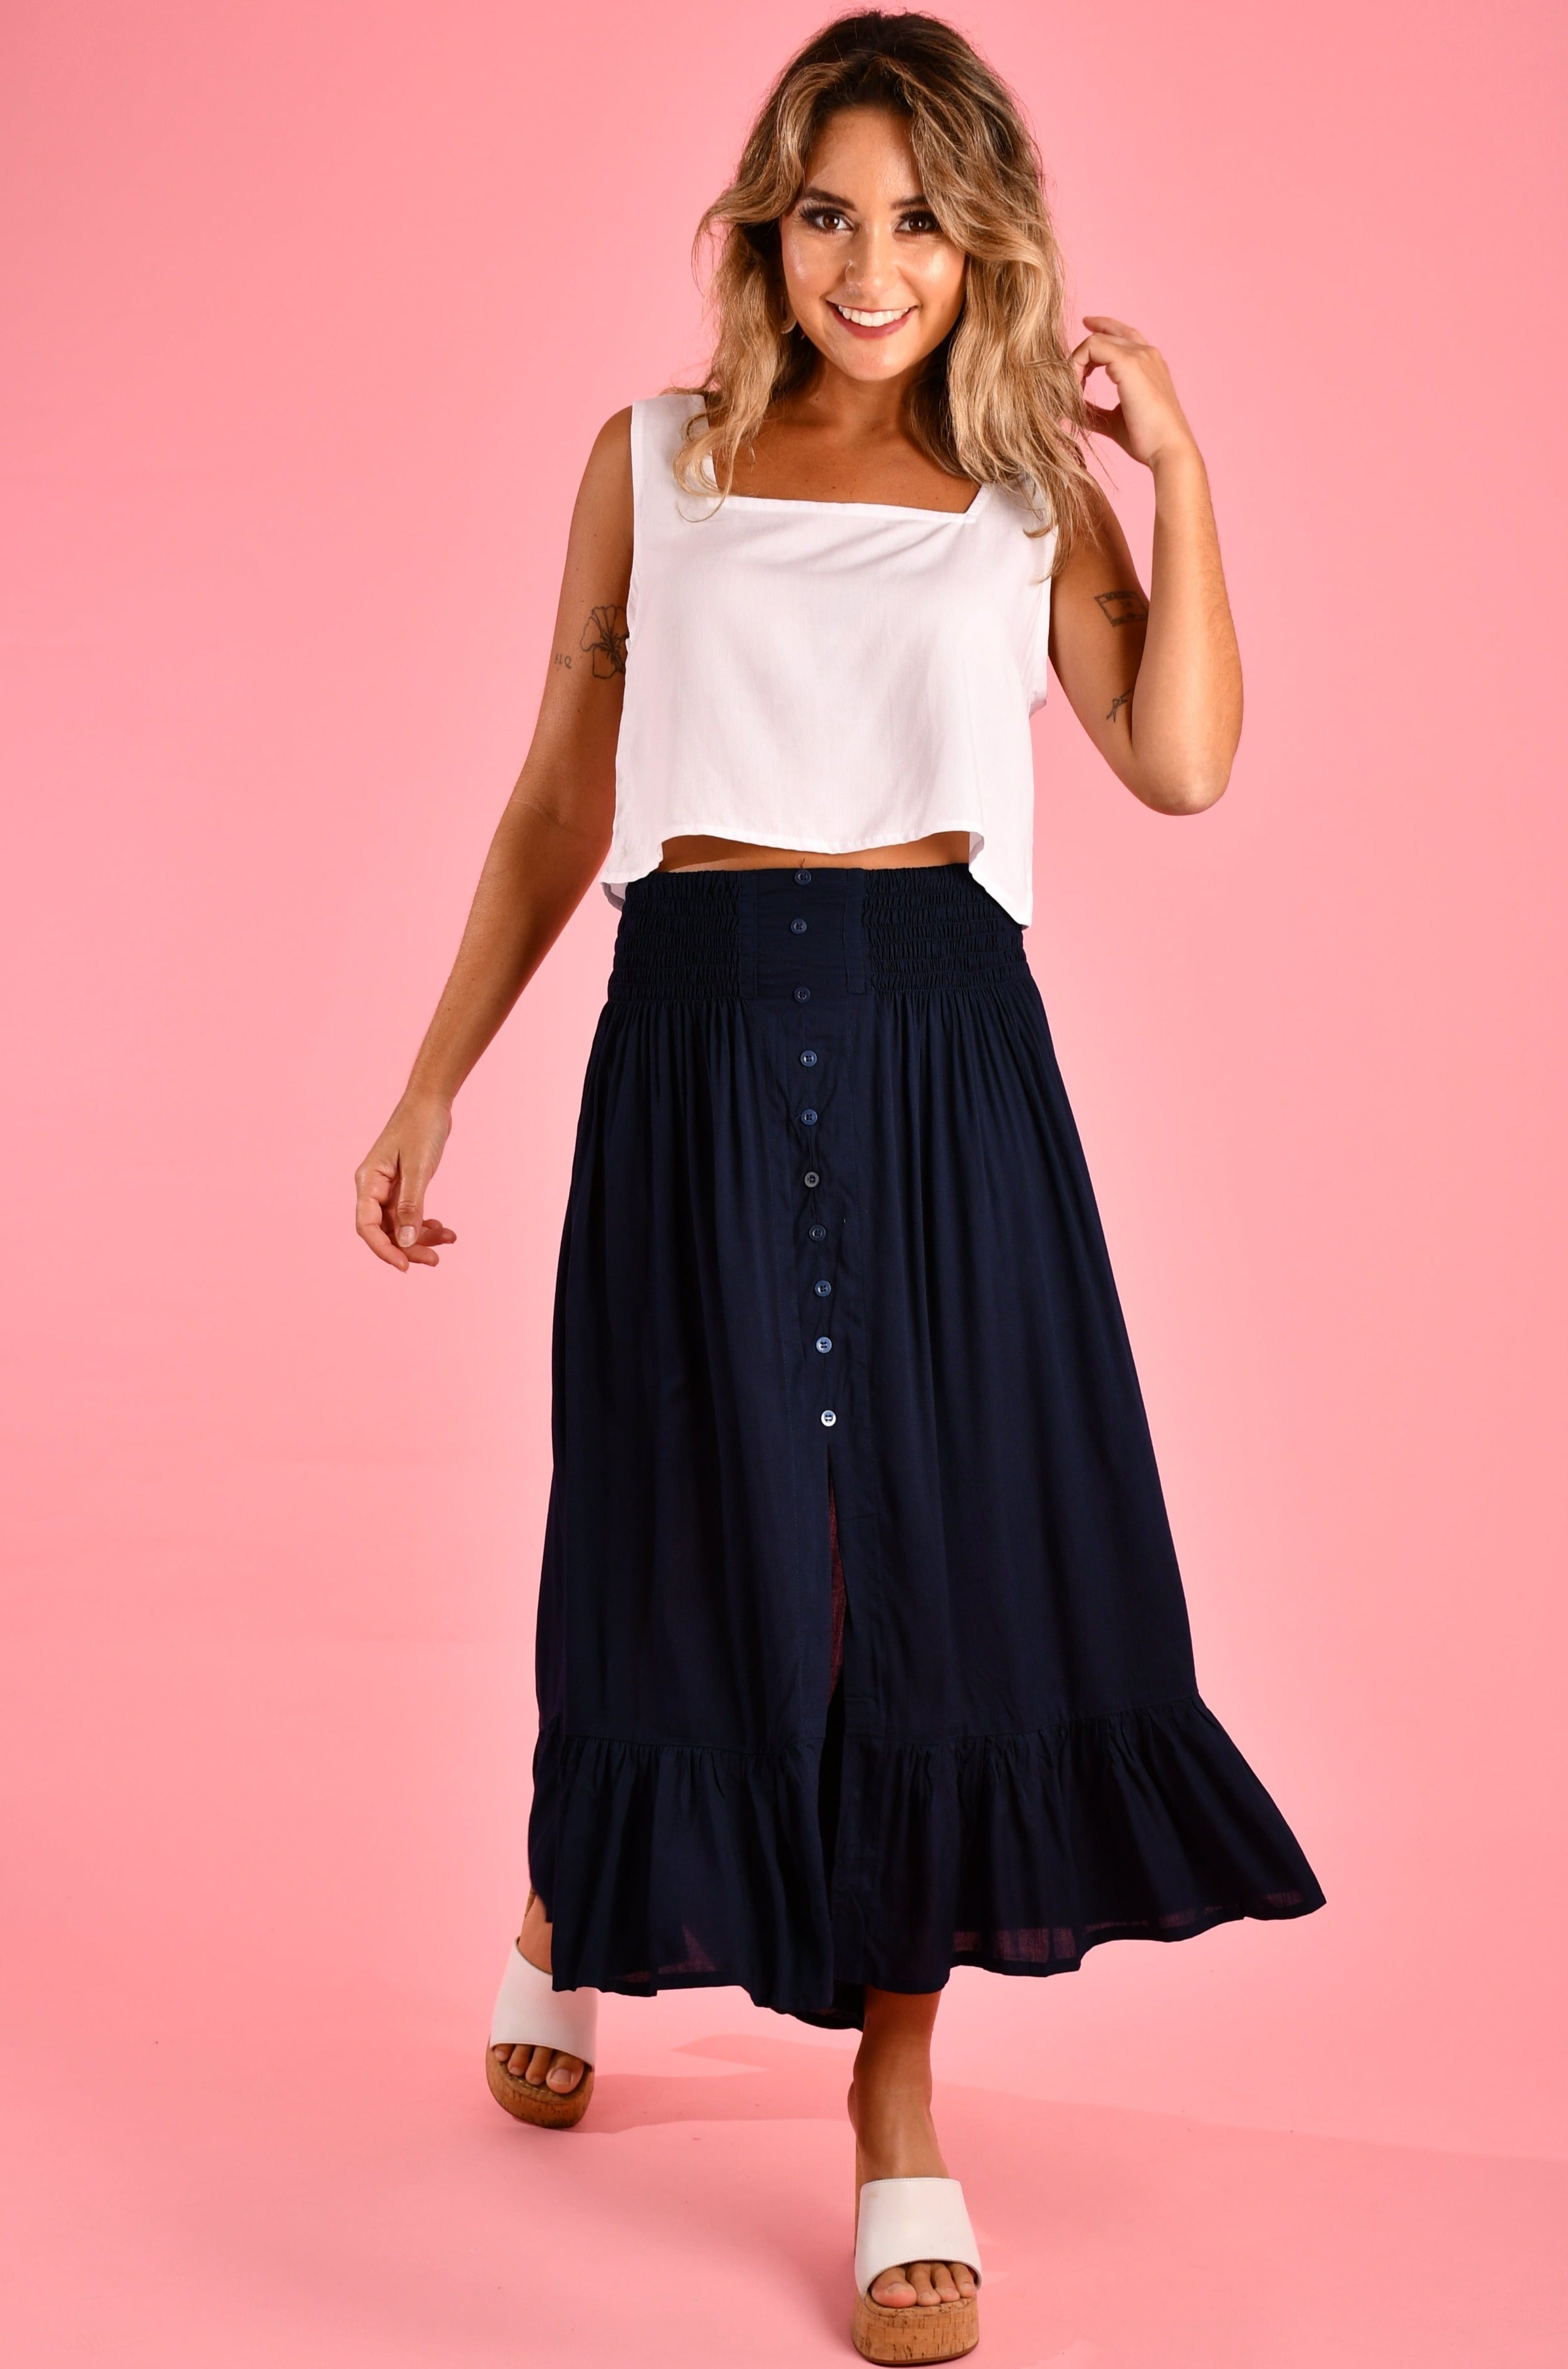 VGLK050 - ROUCHED SKIRT WITH BUTTON DETAIL - NAVY